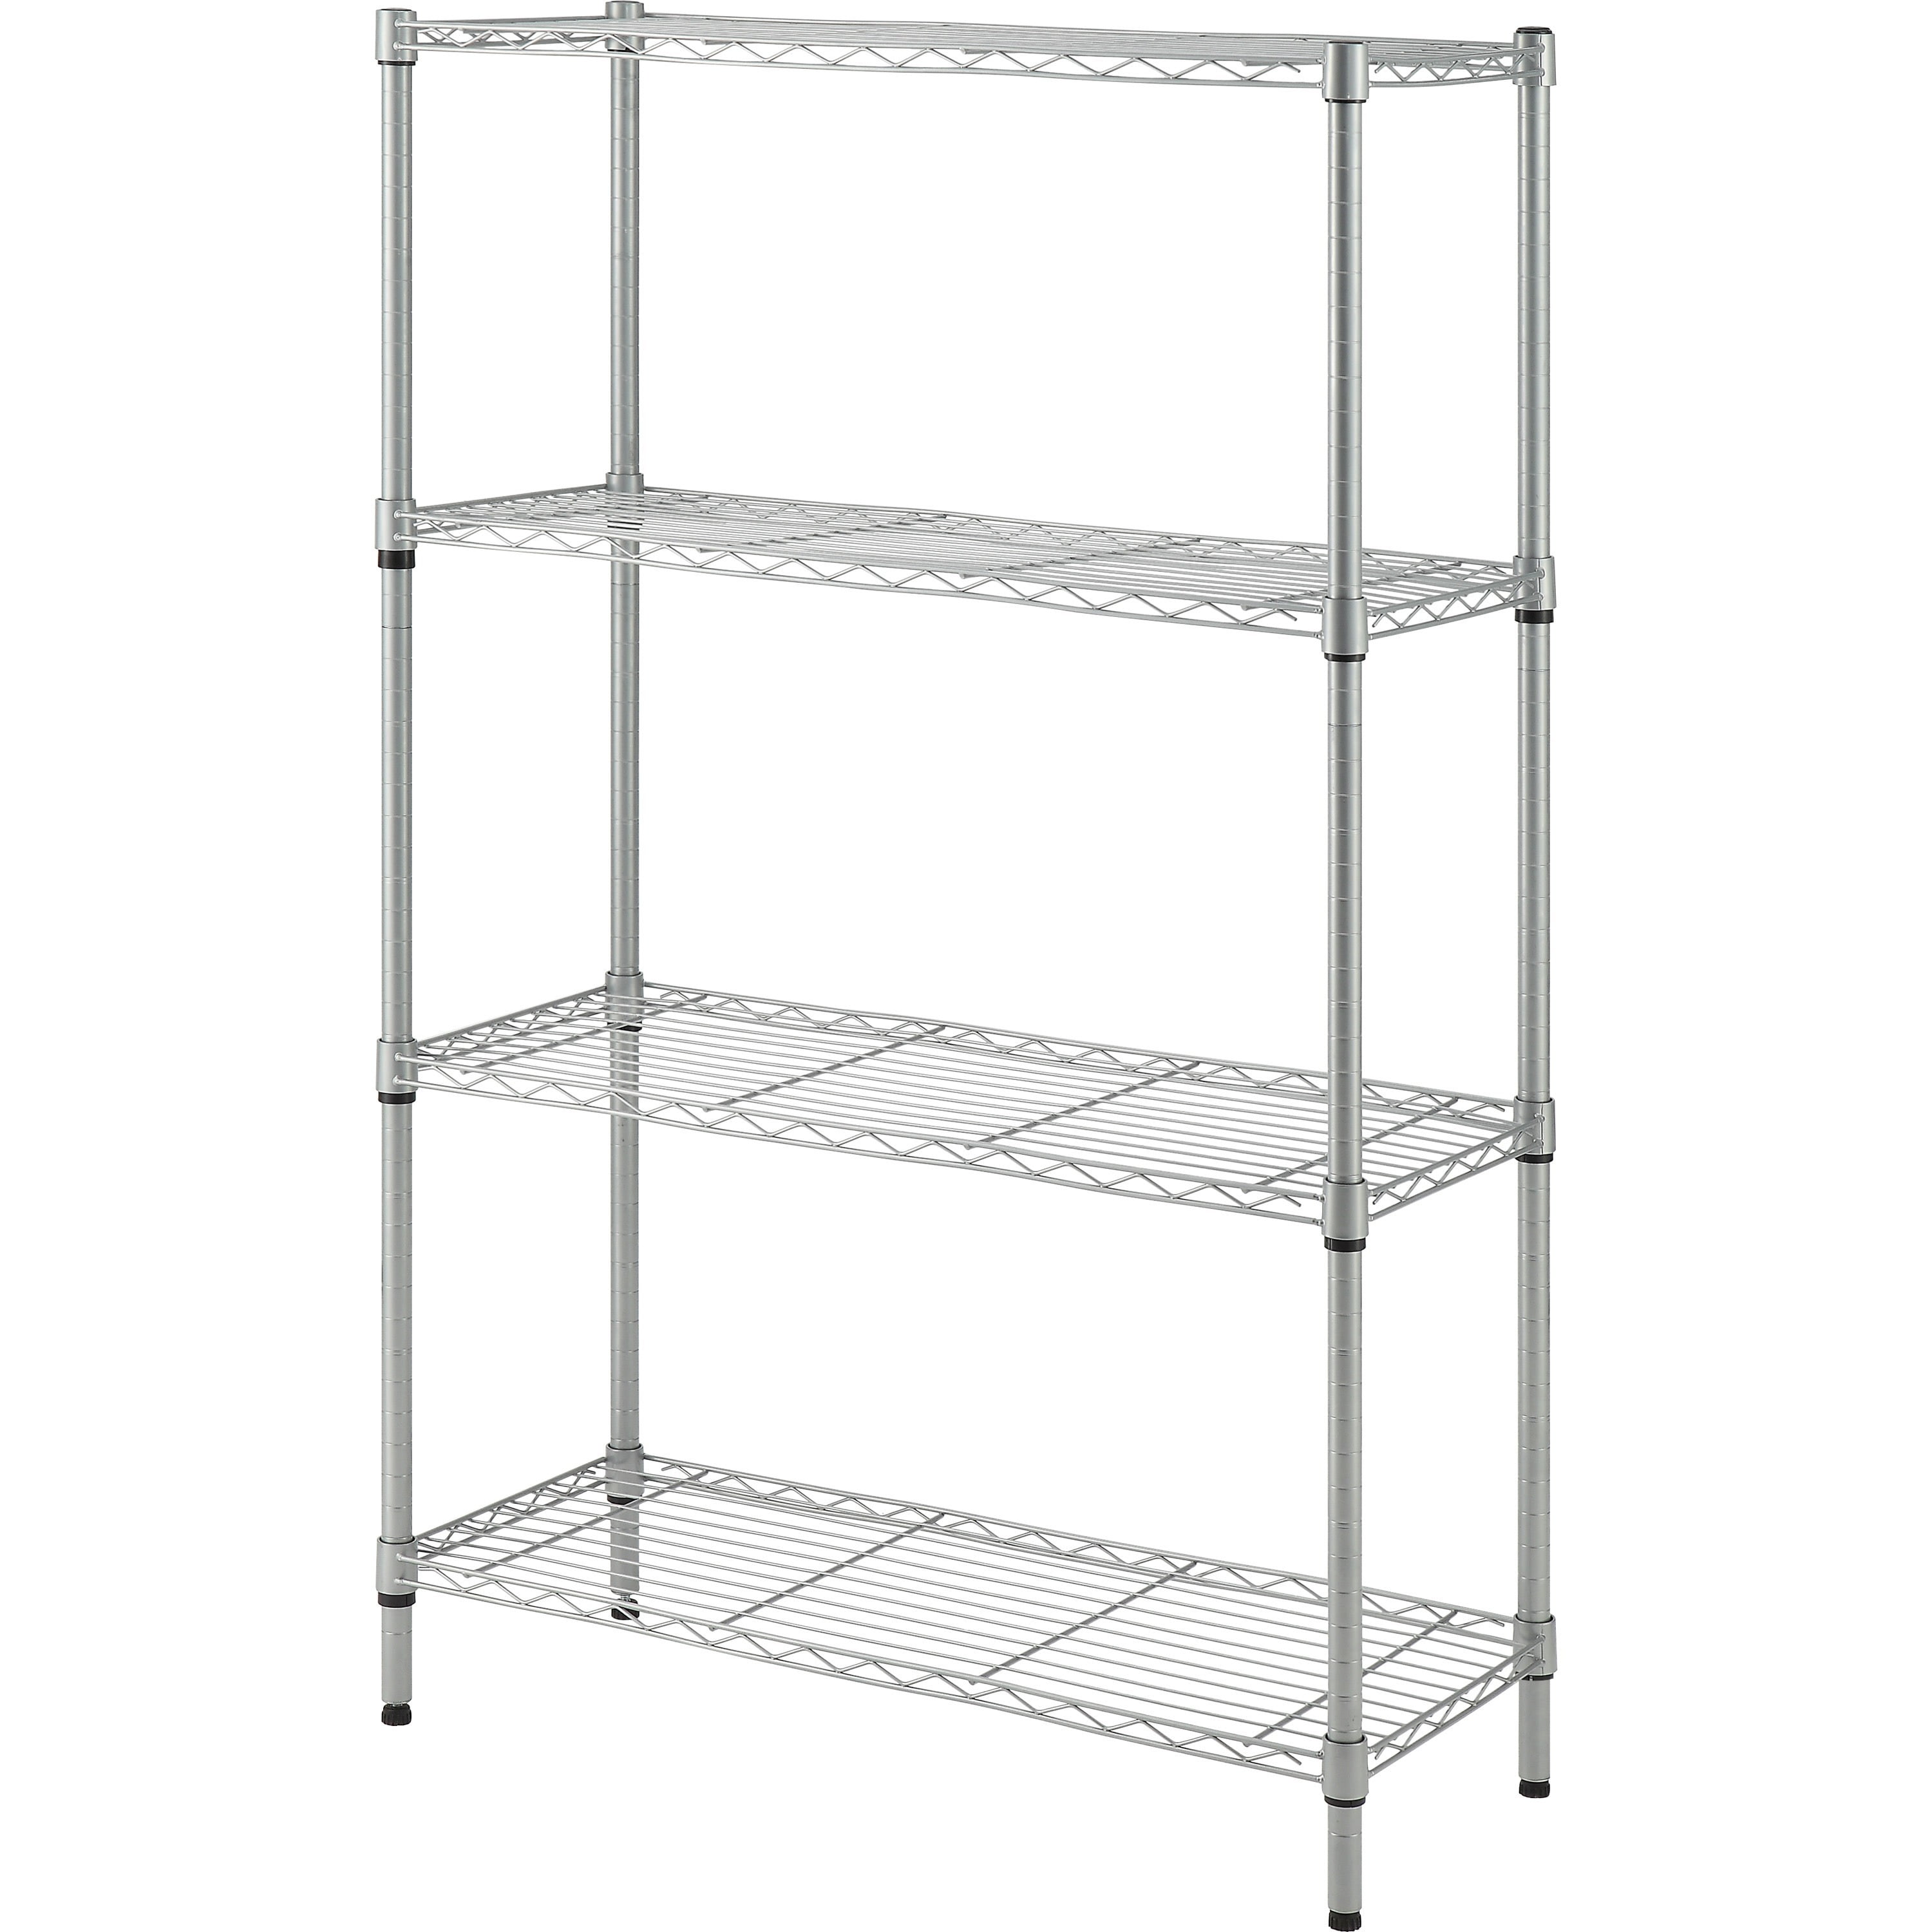 Lorell Light Duty Wire Shelving 1, Easy Home Wire Shelving